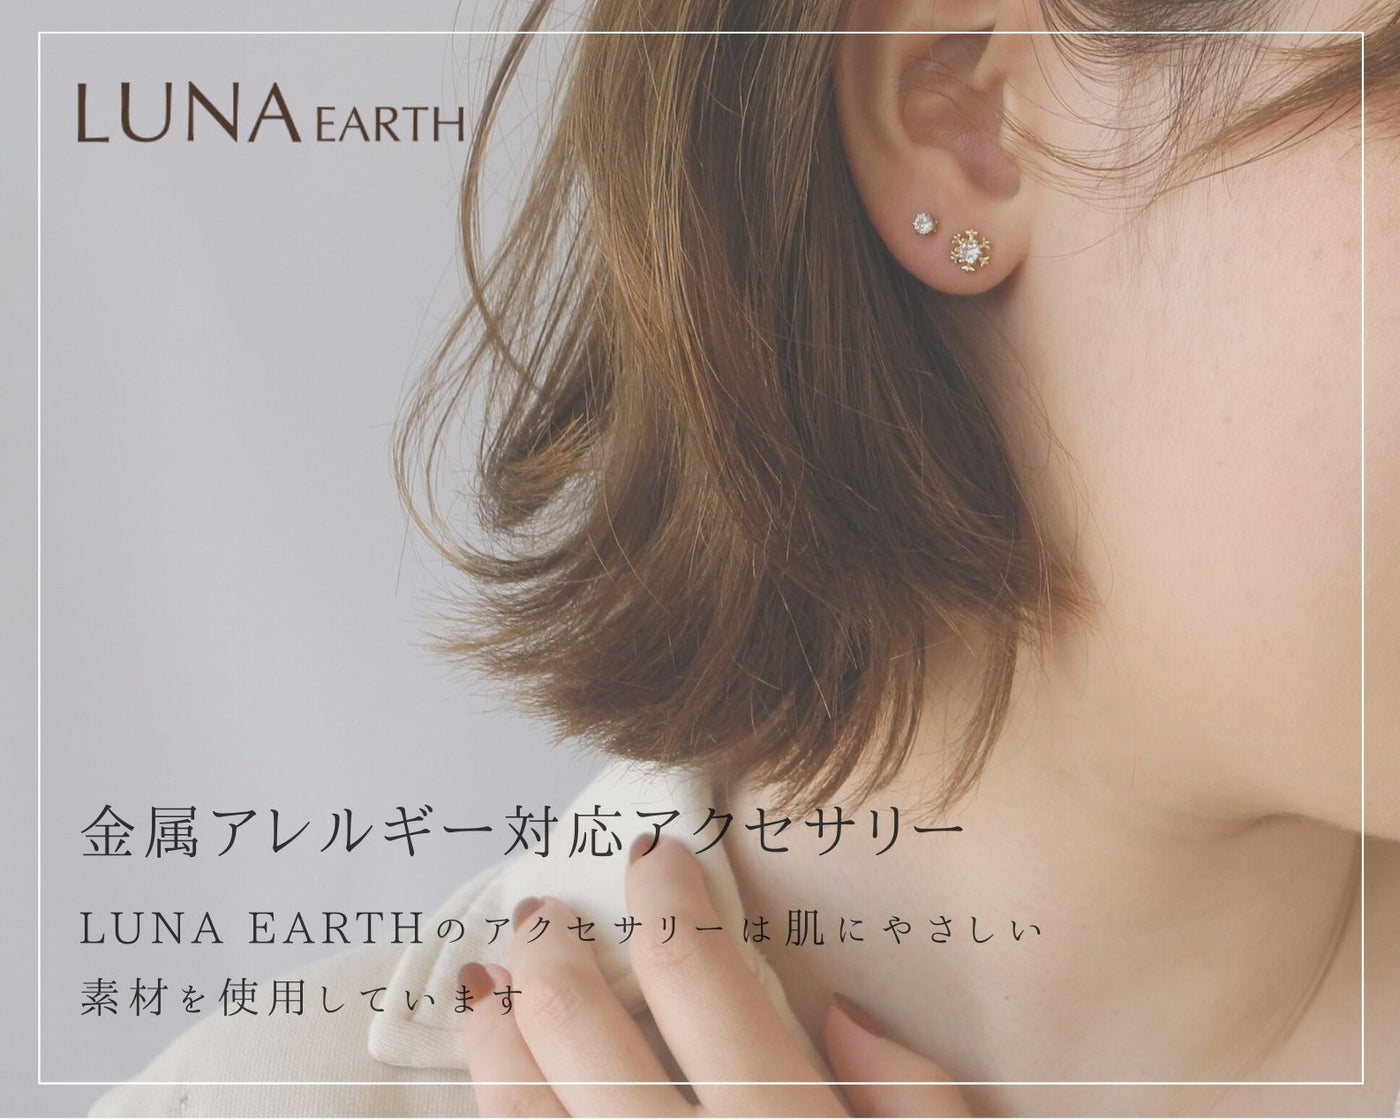 Luna Earth Online ルナアース公式通販サイト